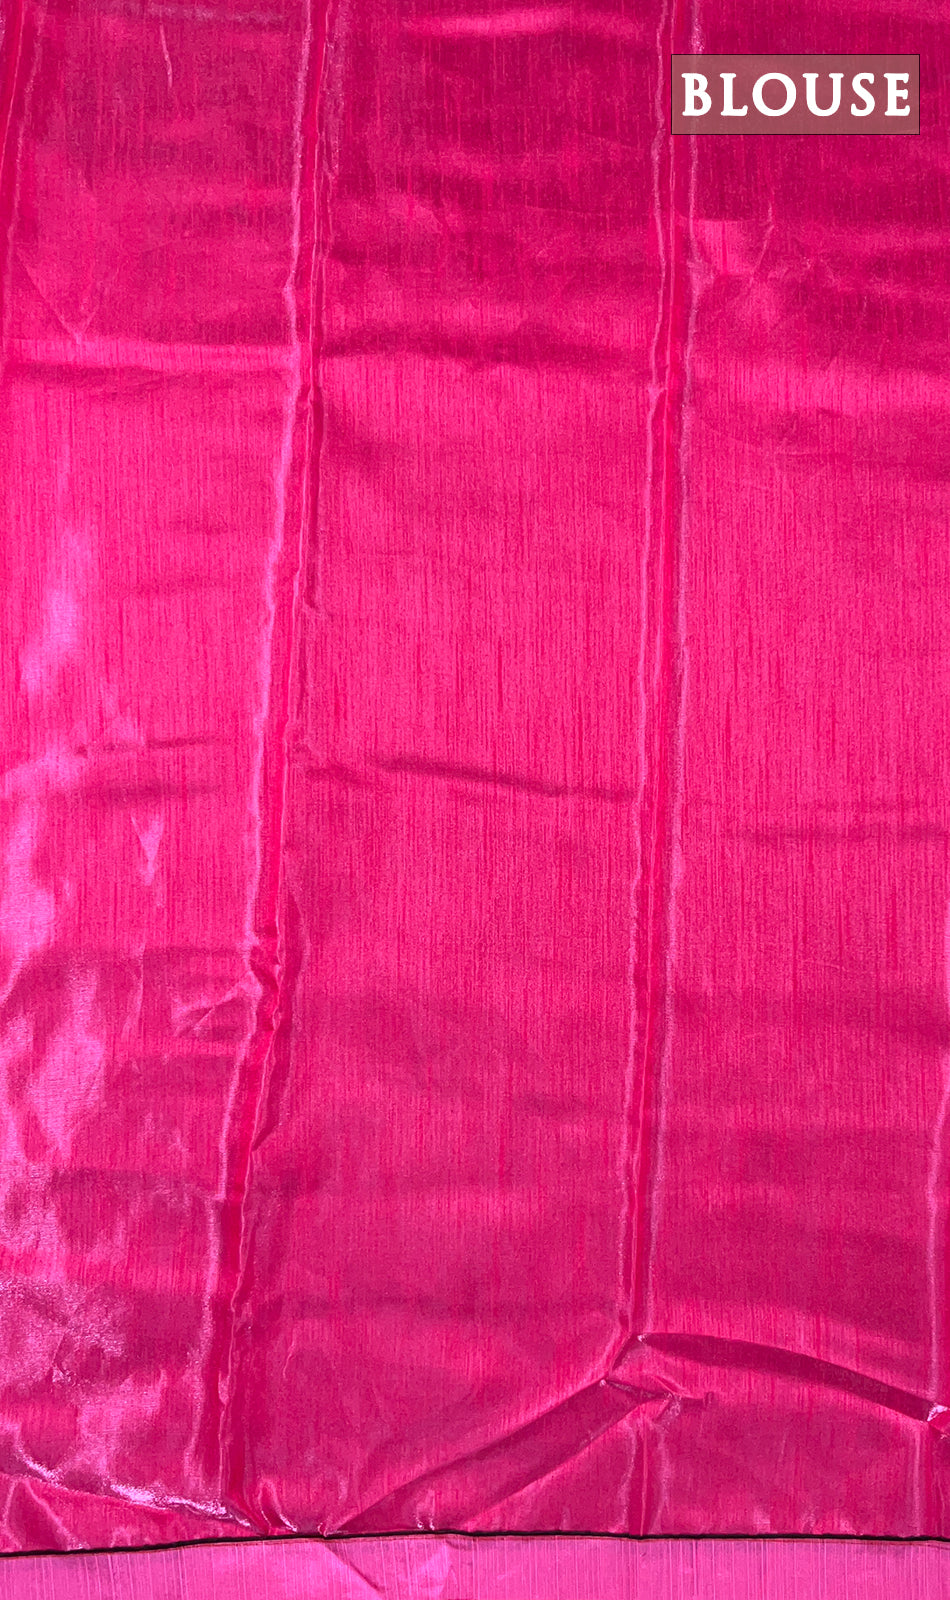 Dual shade of pink and orange georgette saree